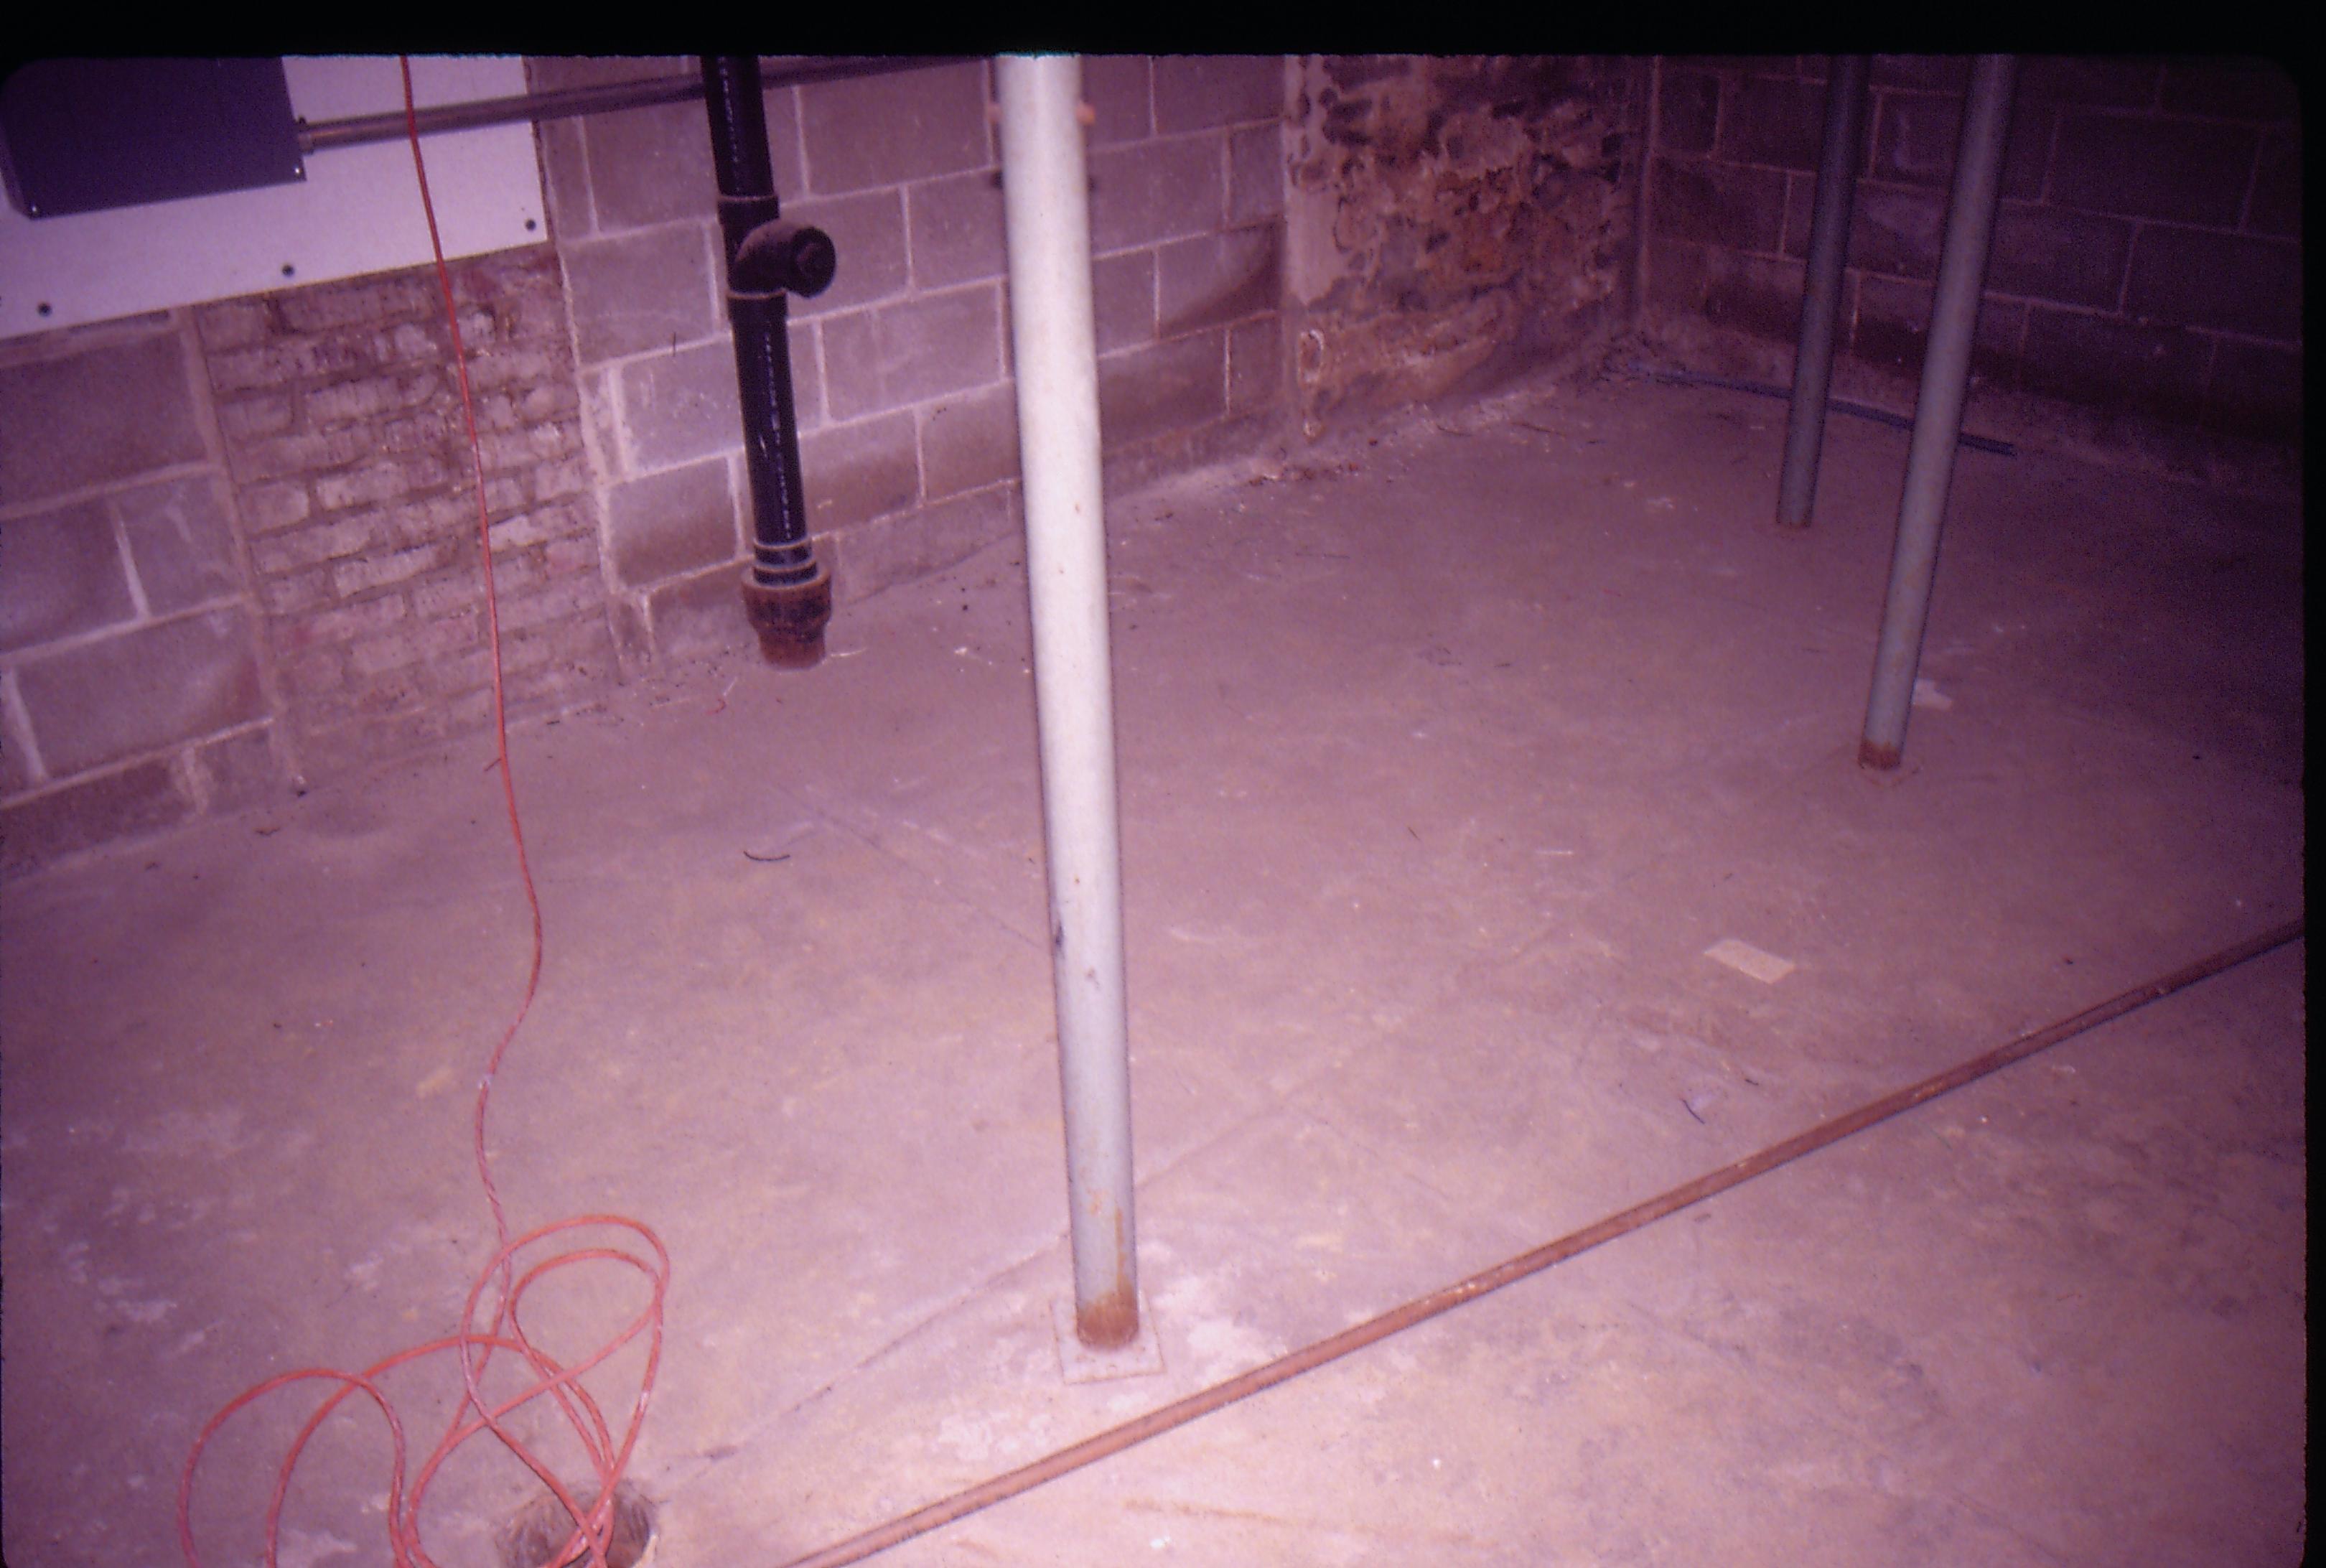 Lyon House - basement. Concrete floor with modern metal supports in center of room. Walls are a mix of old brick and modern cinder block.  Sewer pipe running down wall in background. Extension cords on left near Circuit Breaker box. This area is under kitchen on first floor Looking Northwest from basement Lyon, Basement, concrete, cinder block, breaker box, pipes